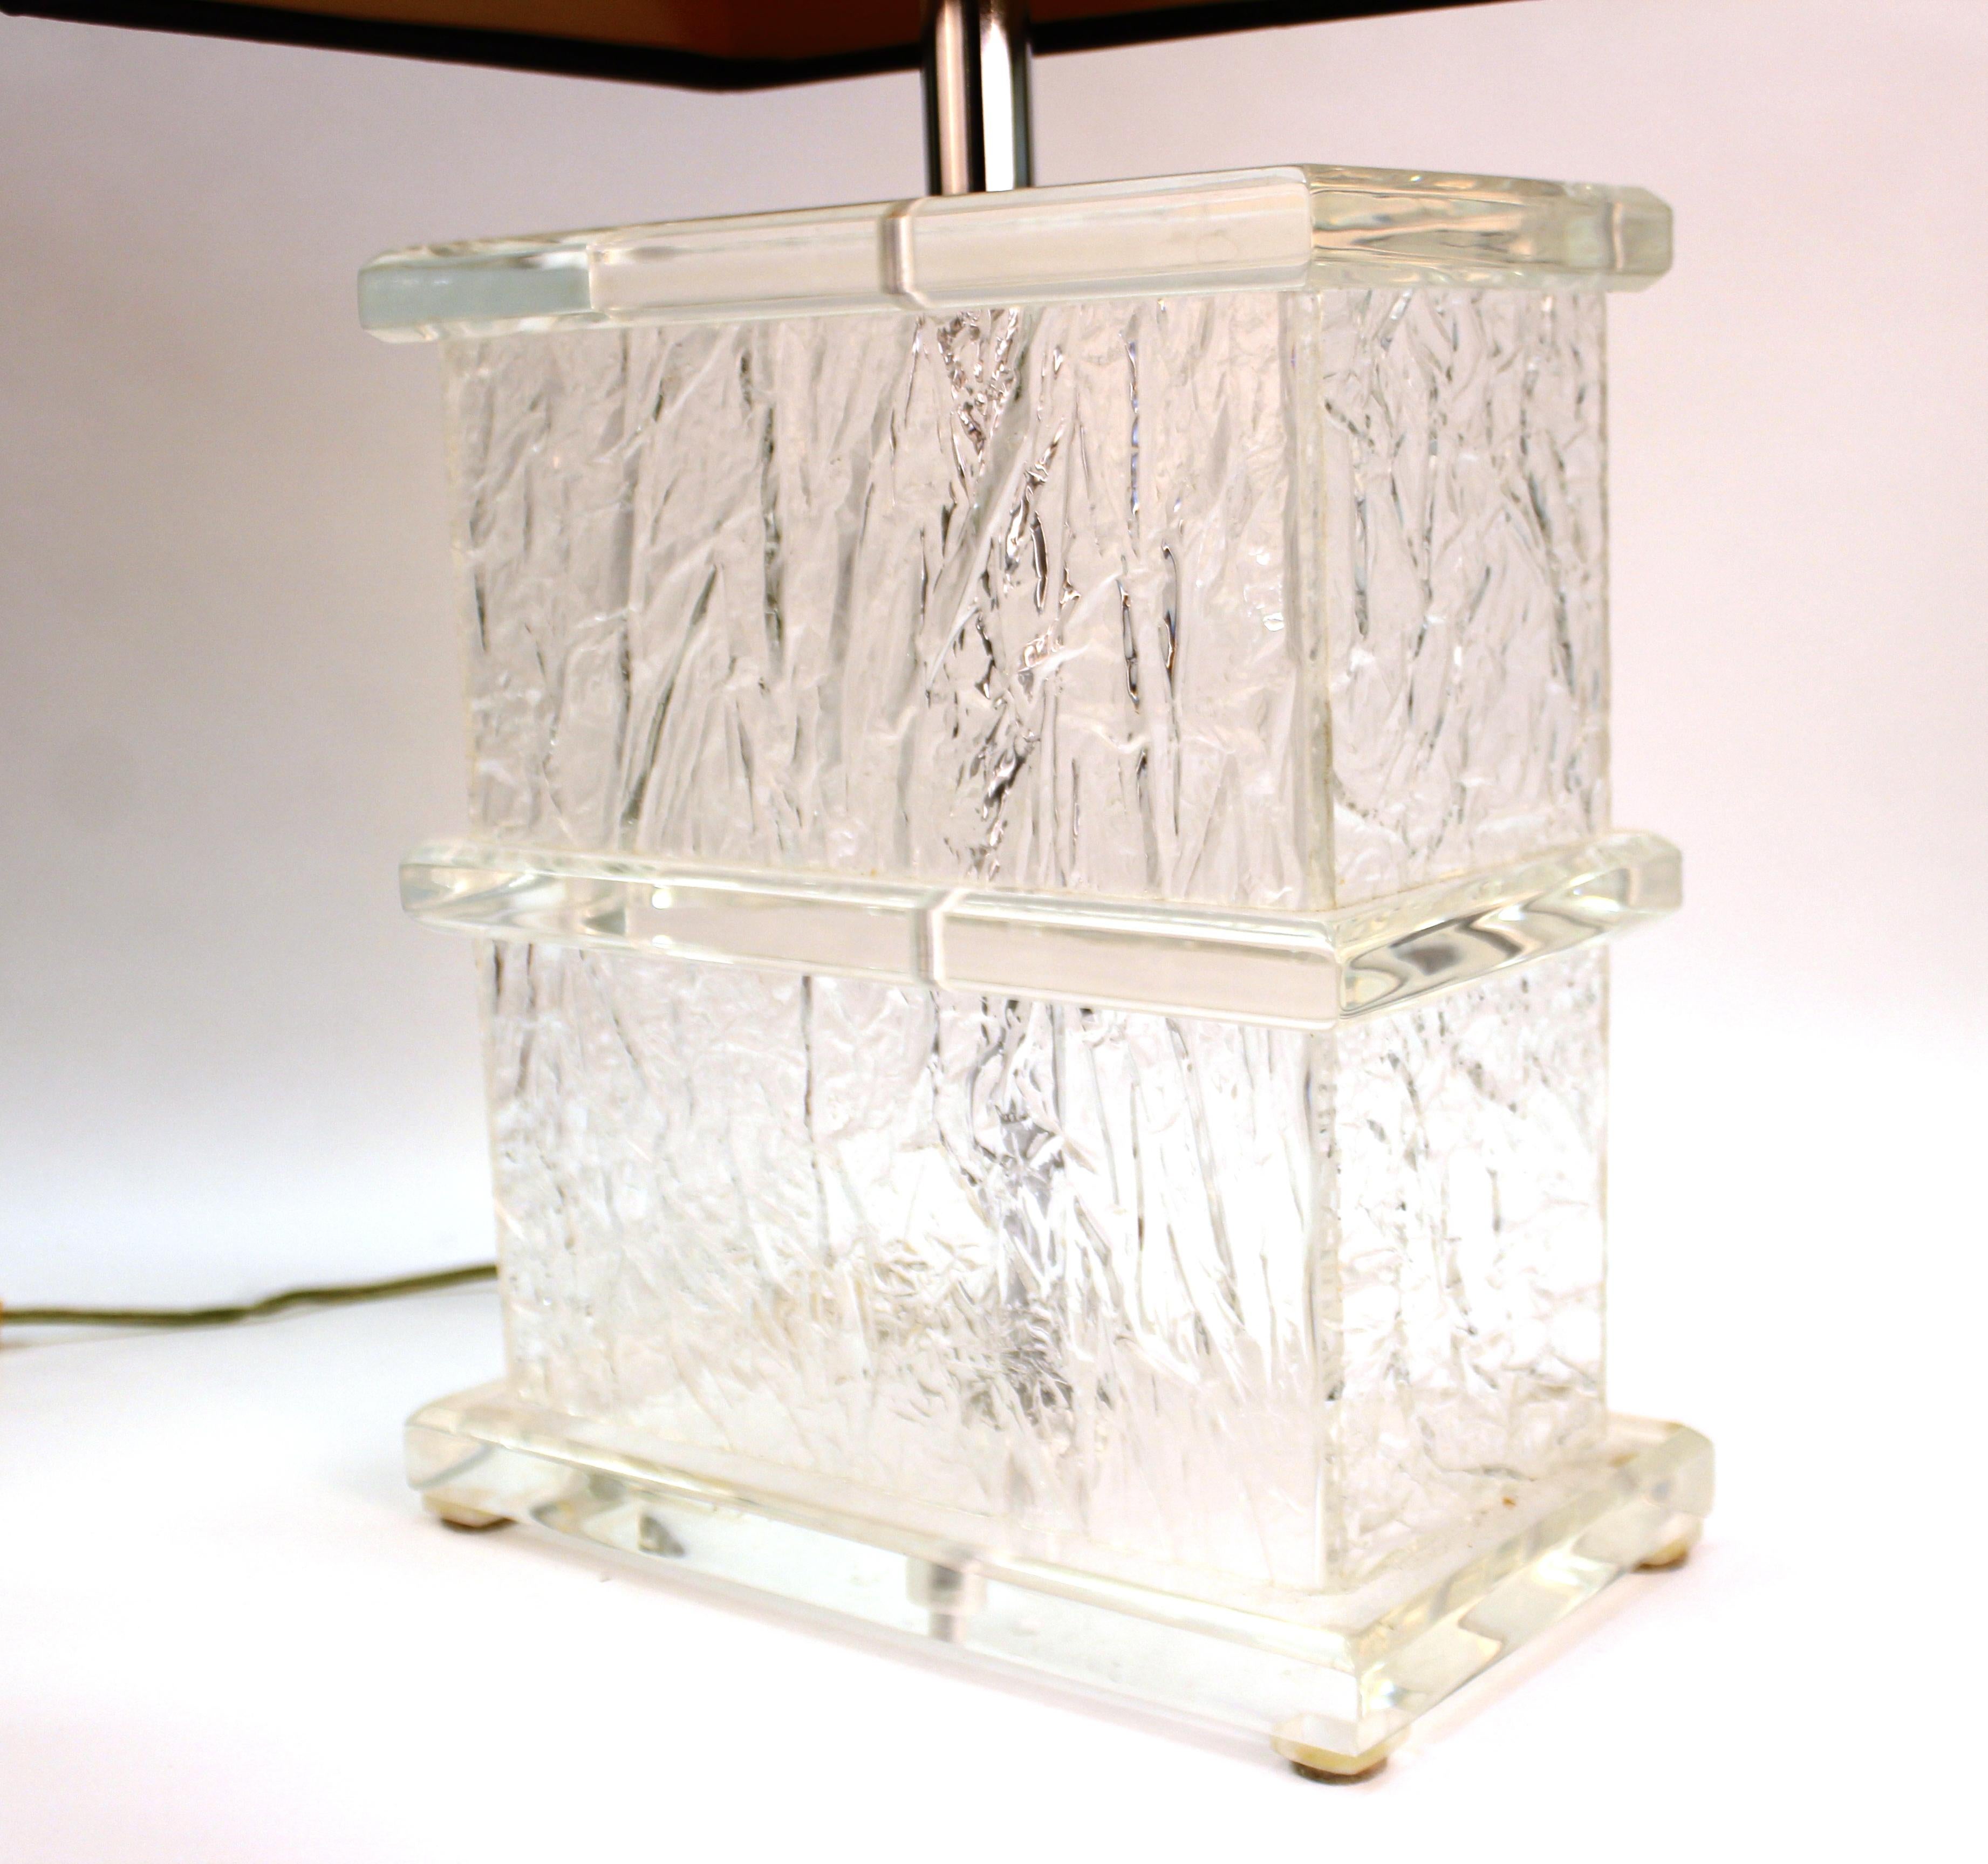 American Mid-Century Modern Lucite Crackle Table Lamps with Black Shades